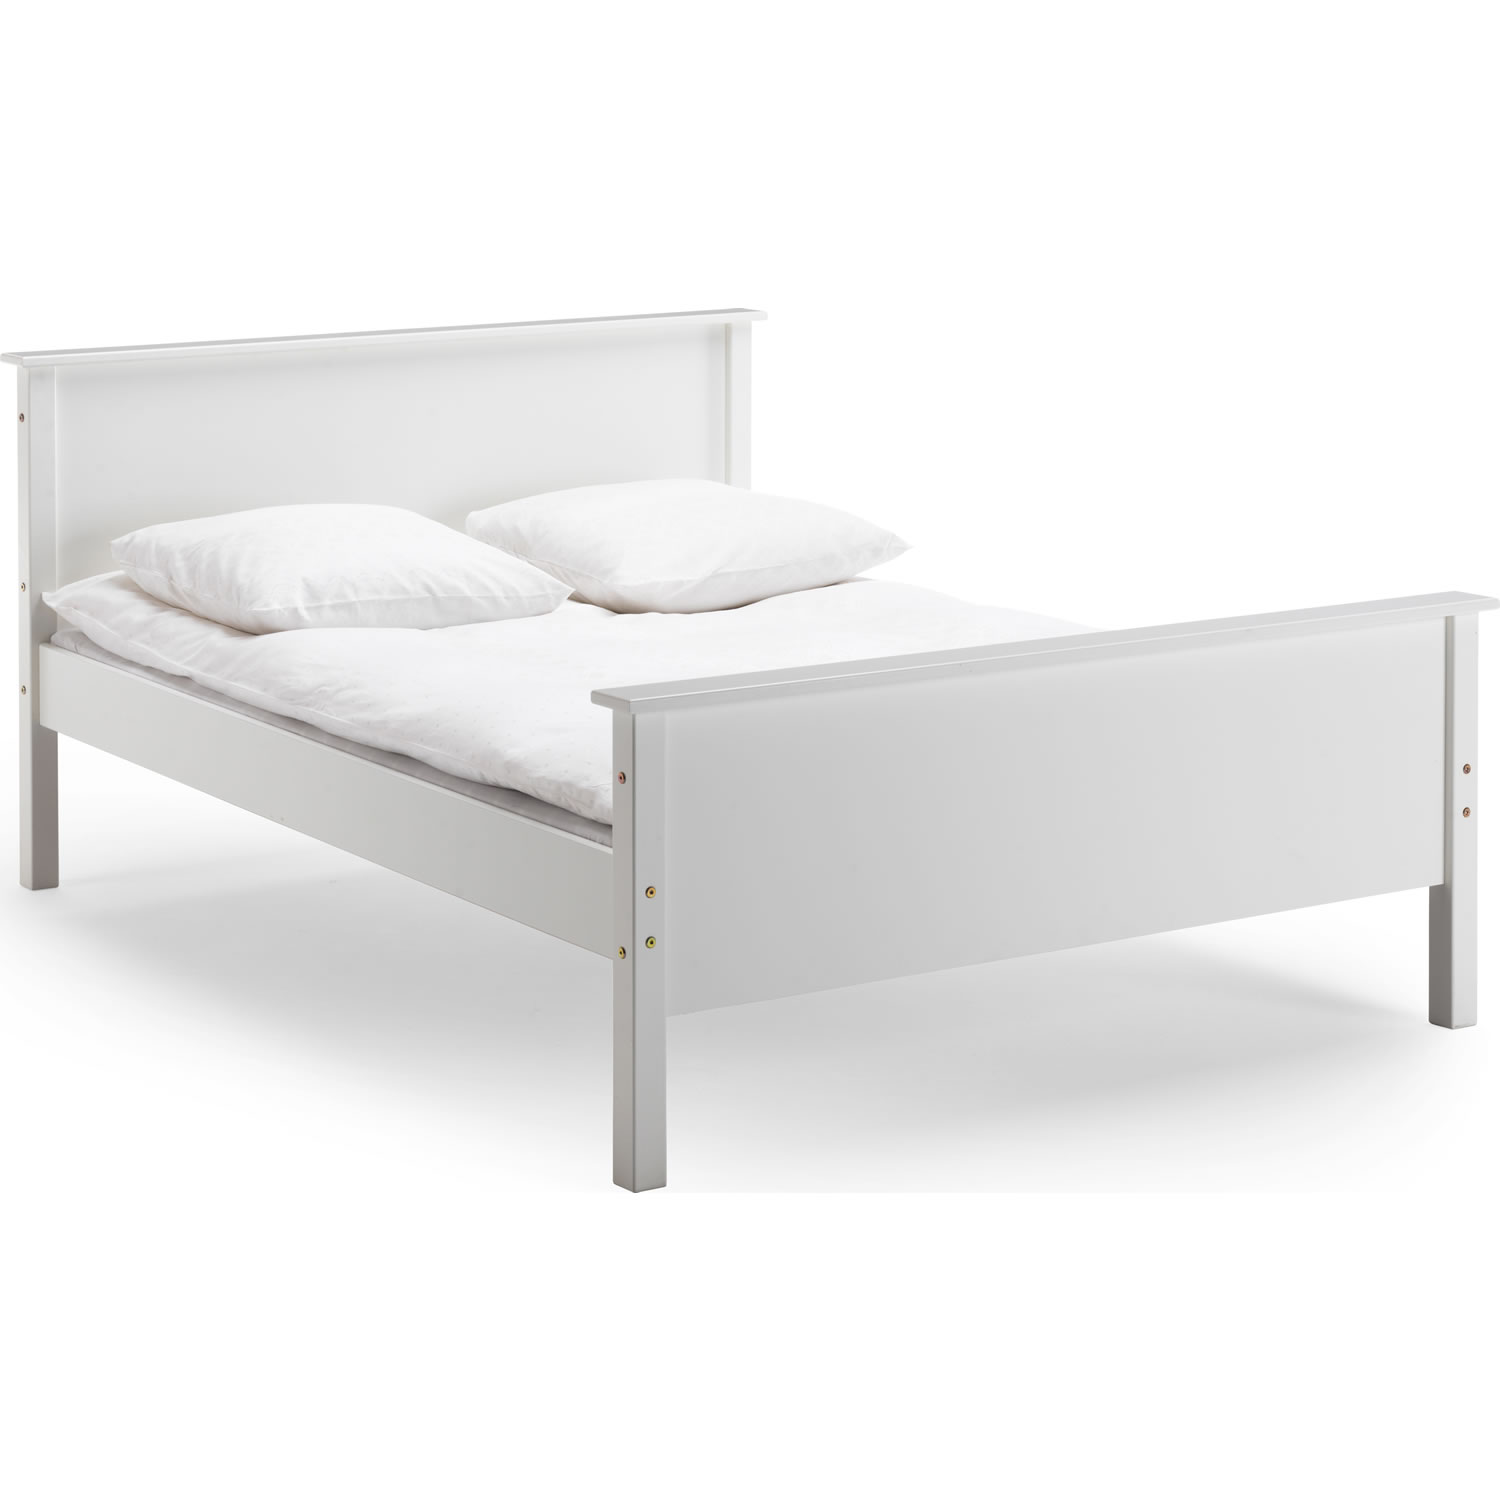 Steens Stockholm Double Bed Frame White